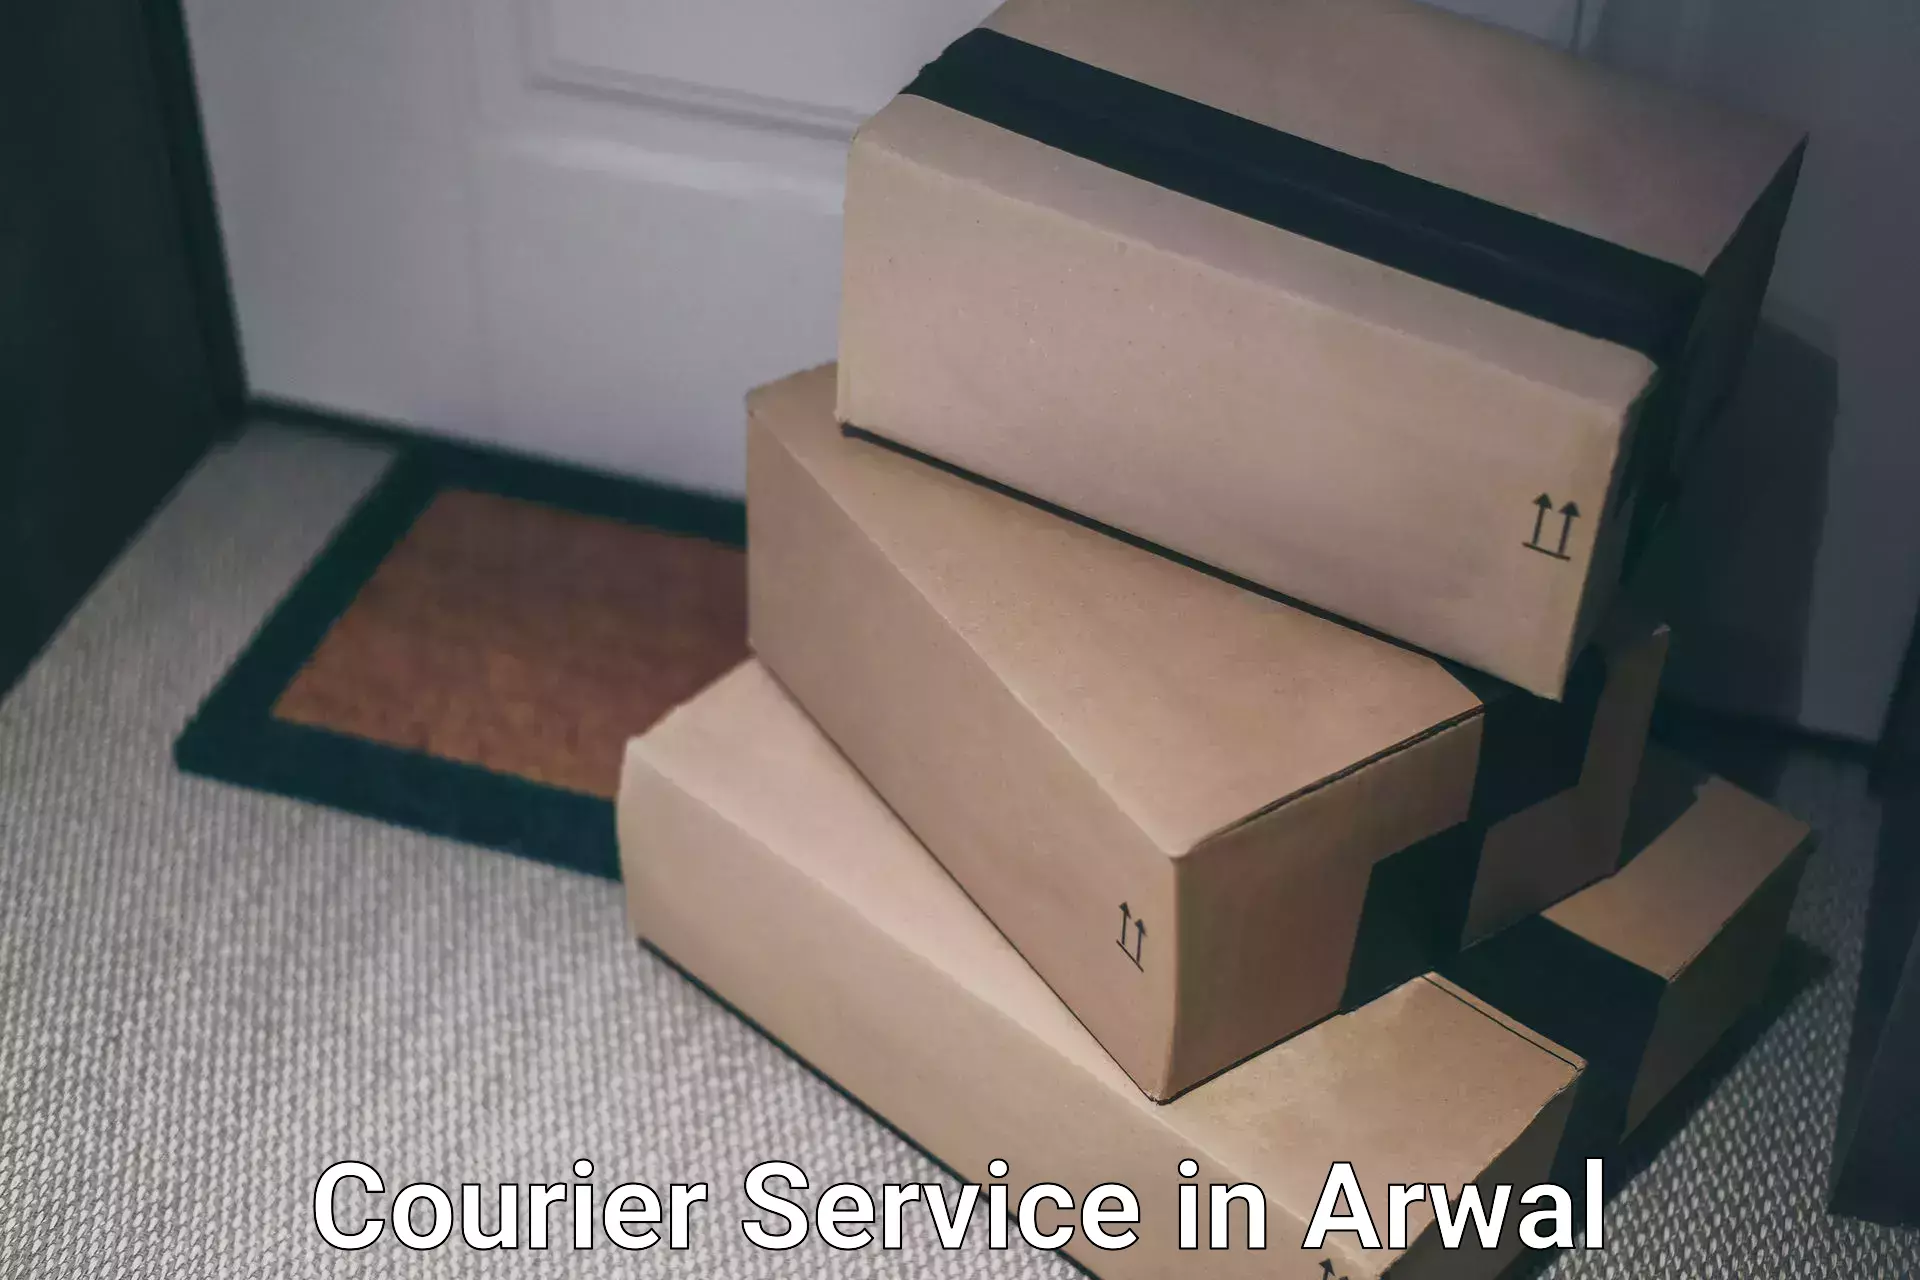 Flexible delivery scheduling in Arwal